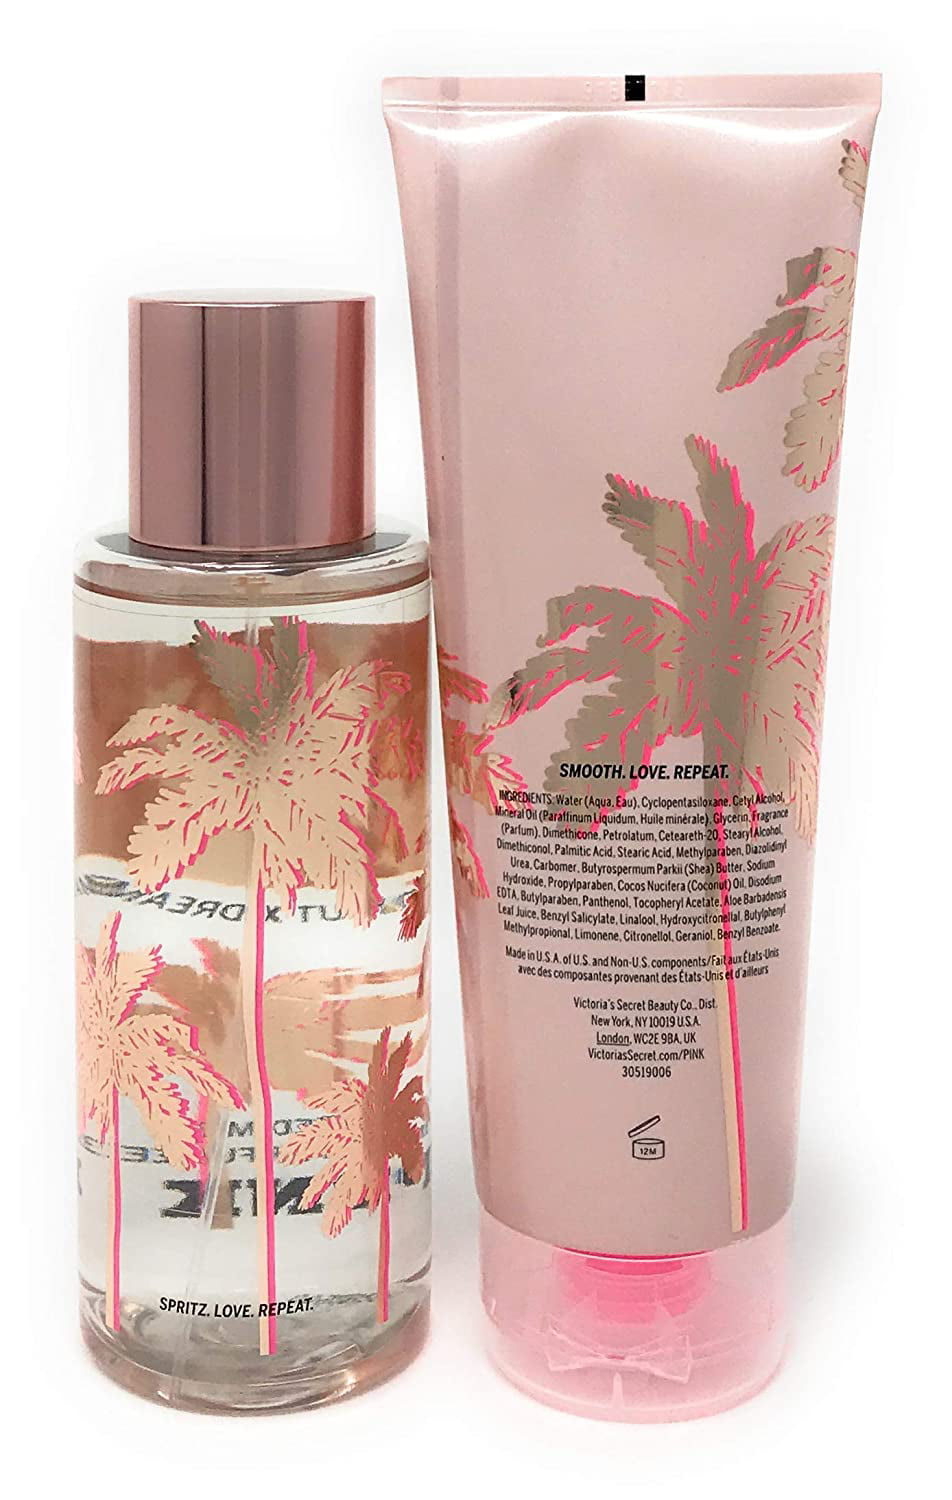 Bronzed Coconut Body Mist by Victoria Secret Pink Fragrance Collection